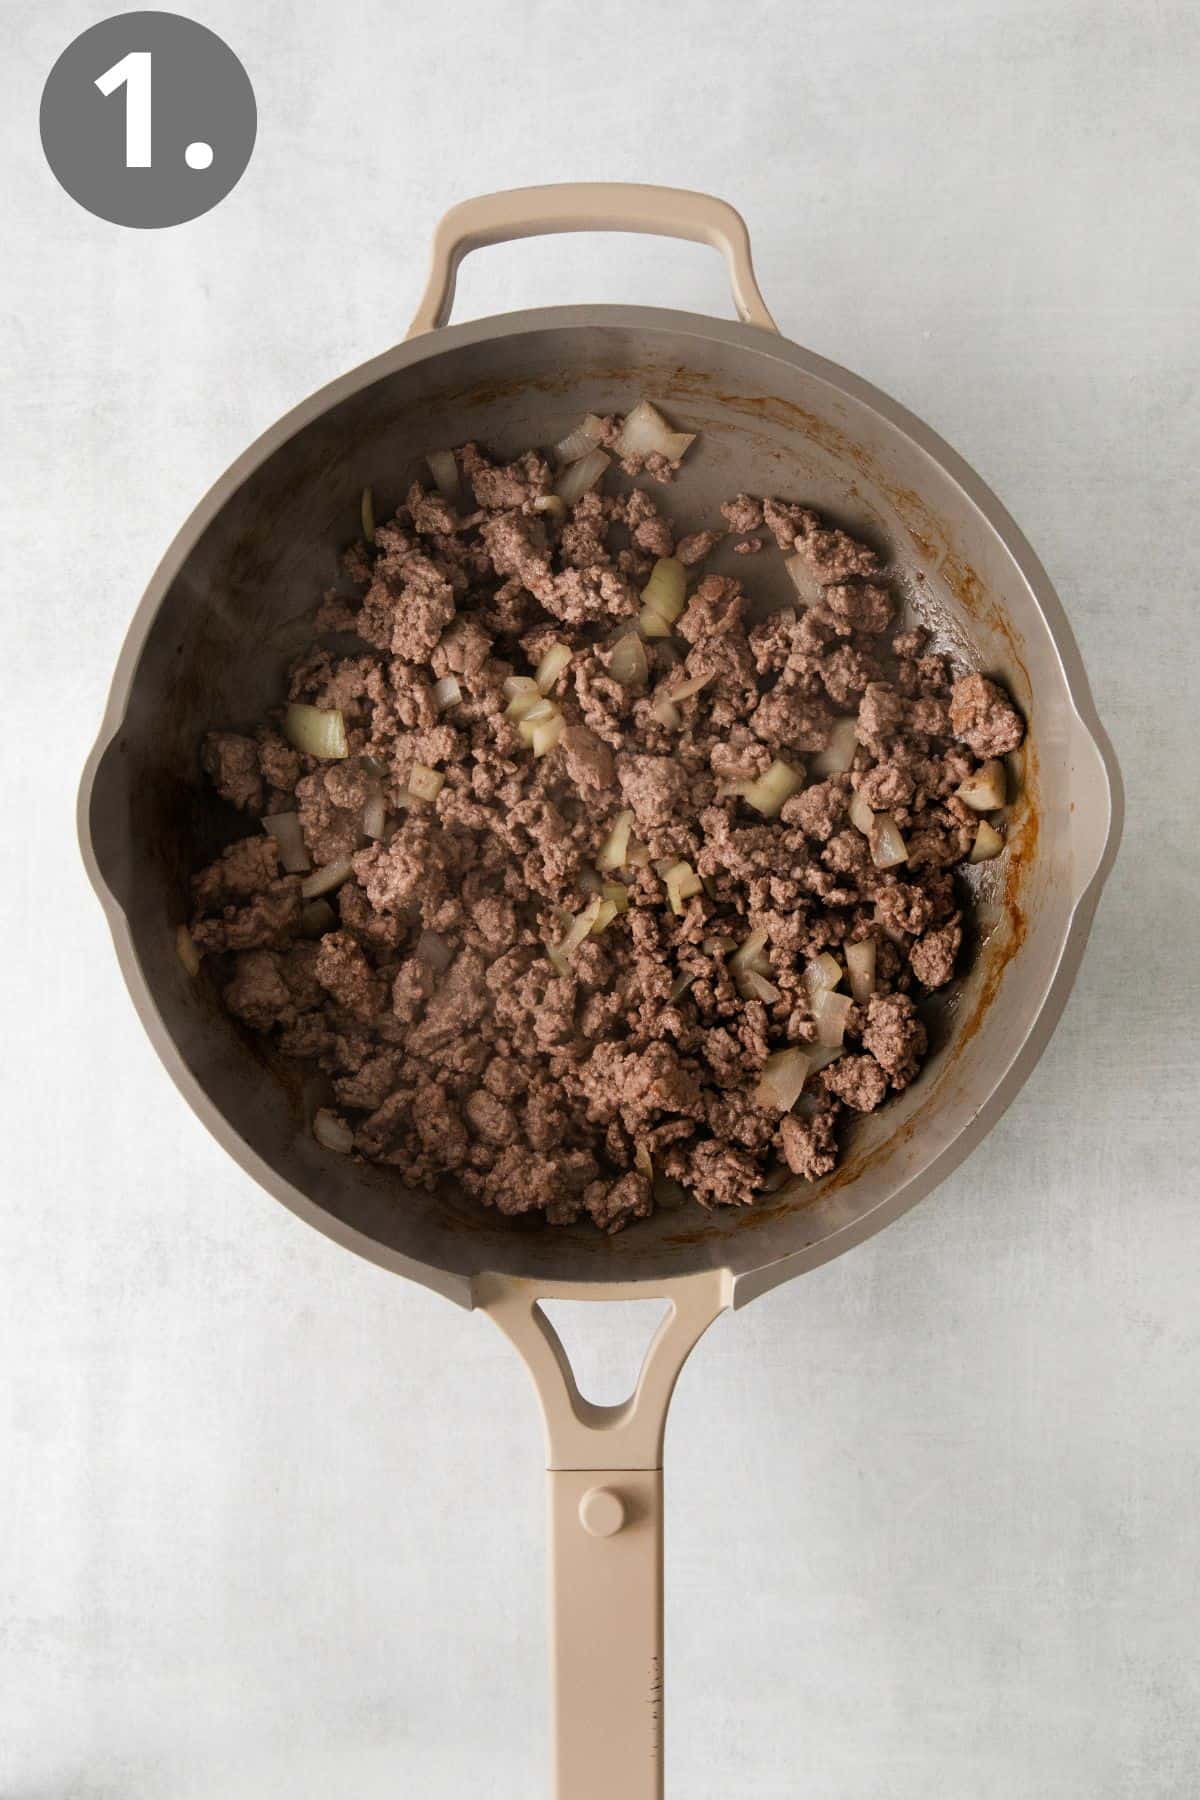 Seasoned ground beef cooked in a skillet